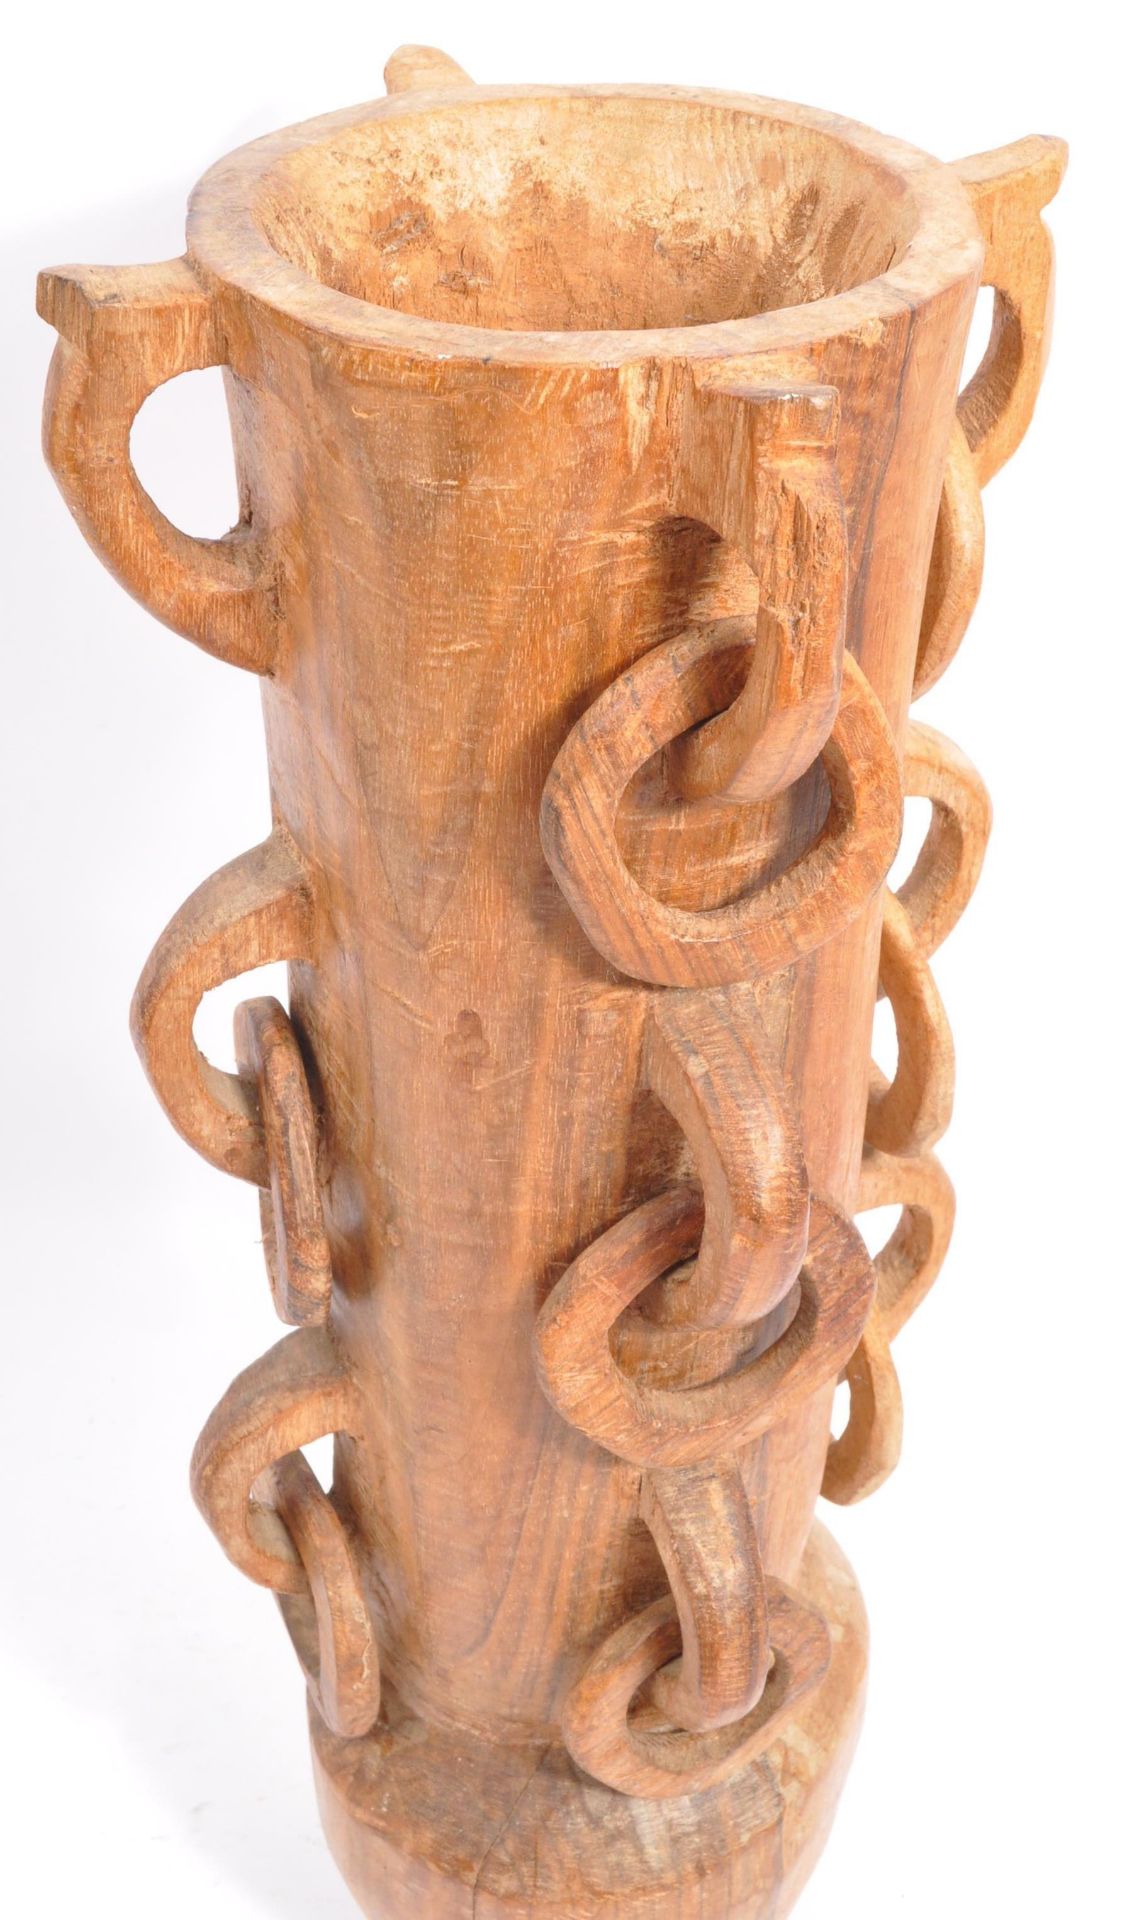 A VINTAGE 20TH CENTURY HAND CARVED WOODEN RING VASE - Image 4 of 6